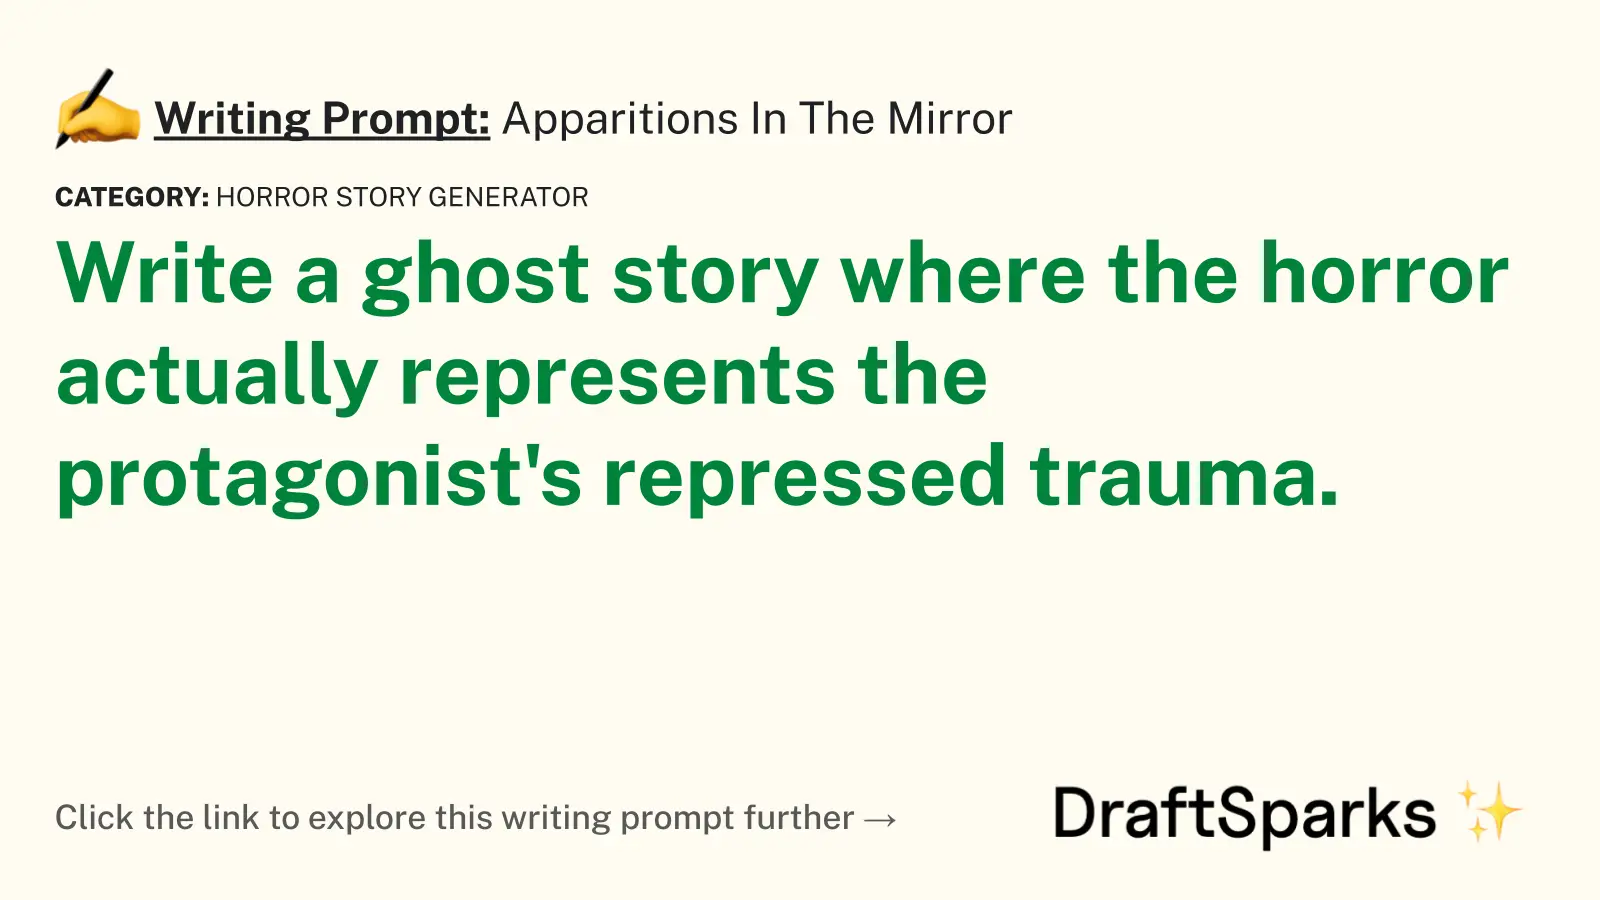 Apparitions In The Mirror